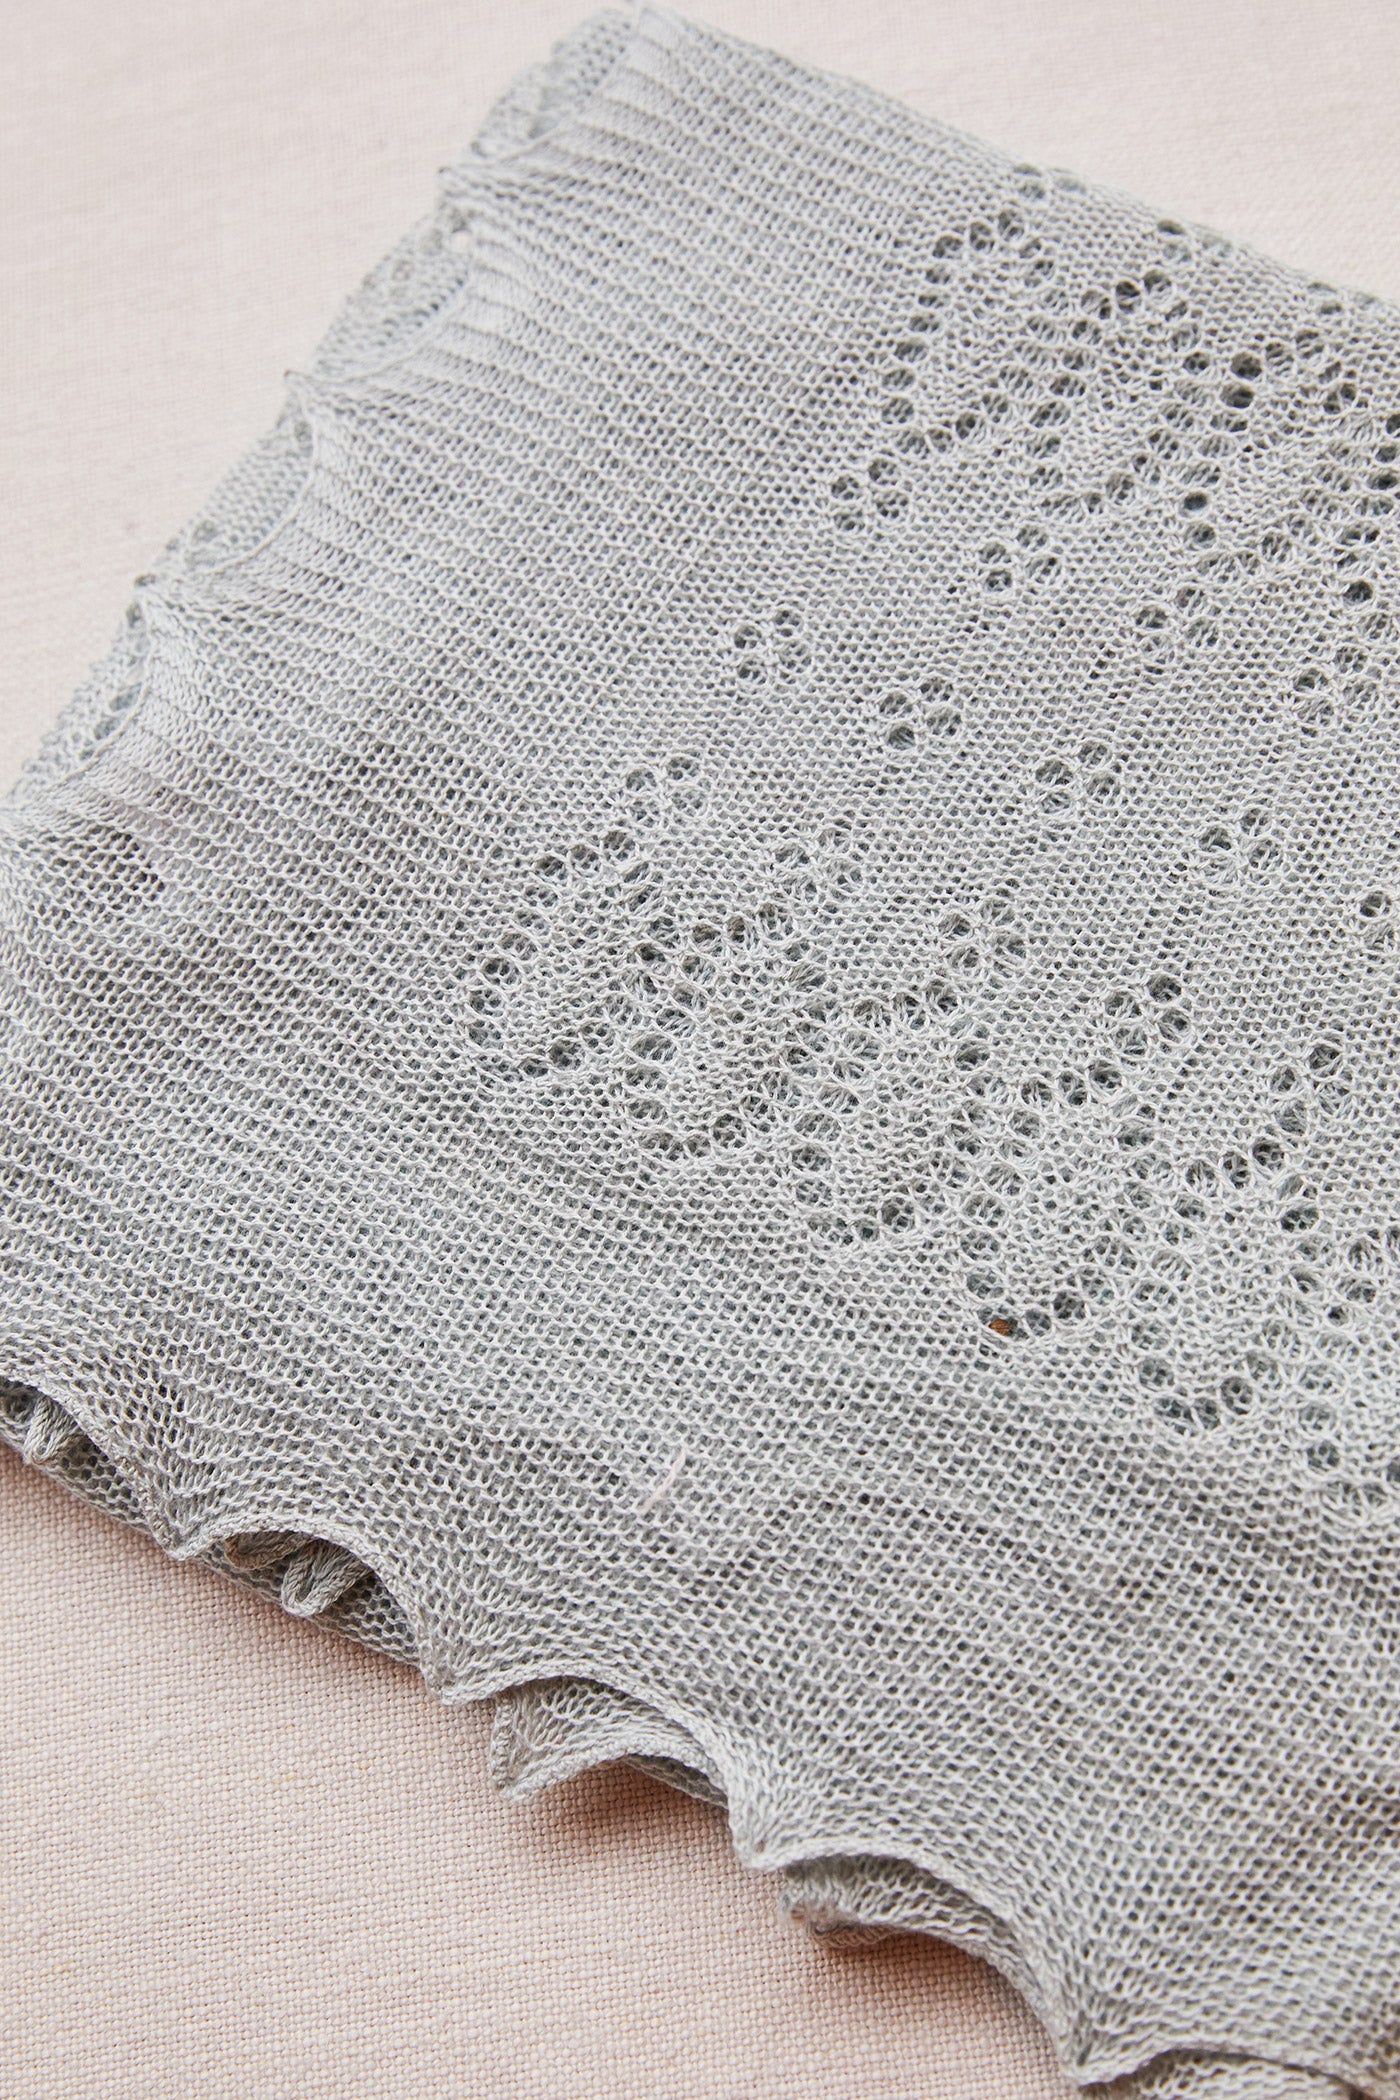 Cotton Shawl in Lace Knit